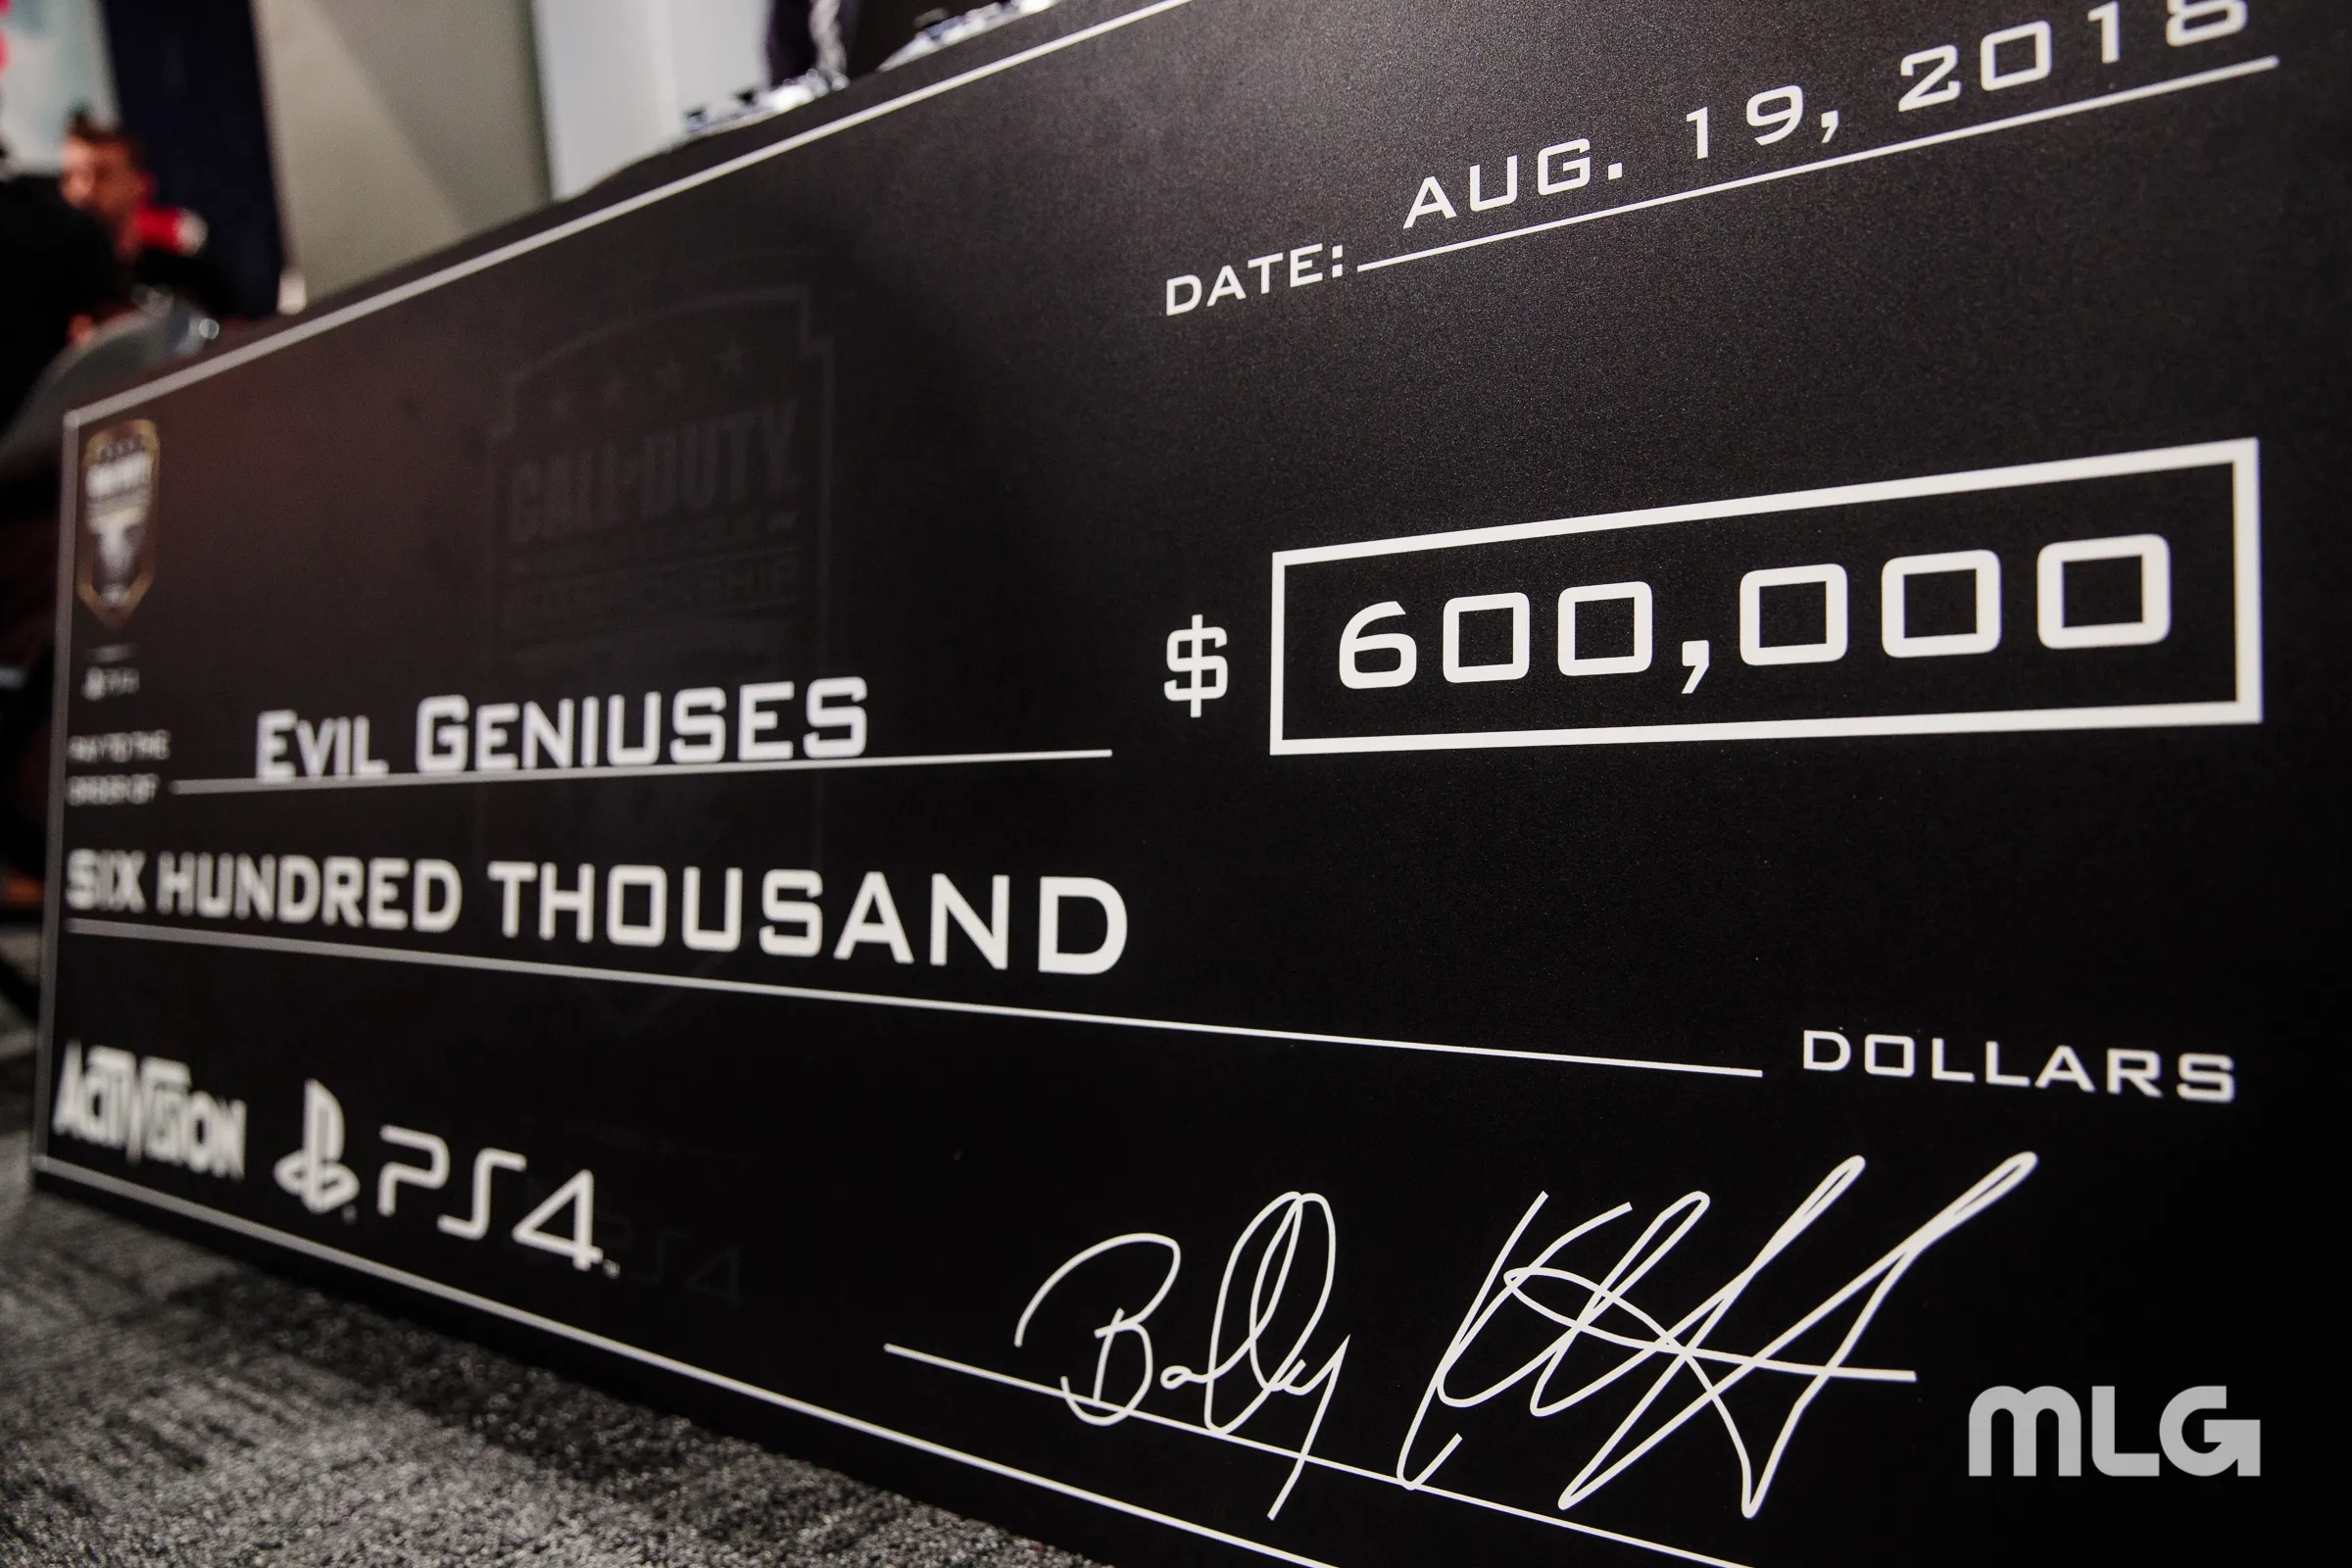 The first-place check for Evil Geniuses at CoD Champs 2018.